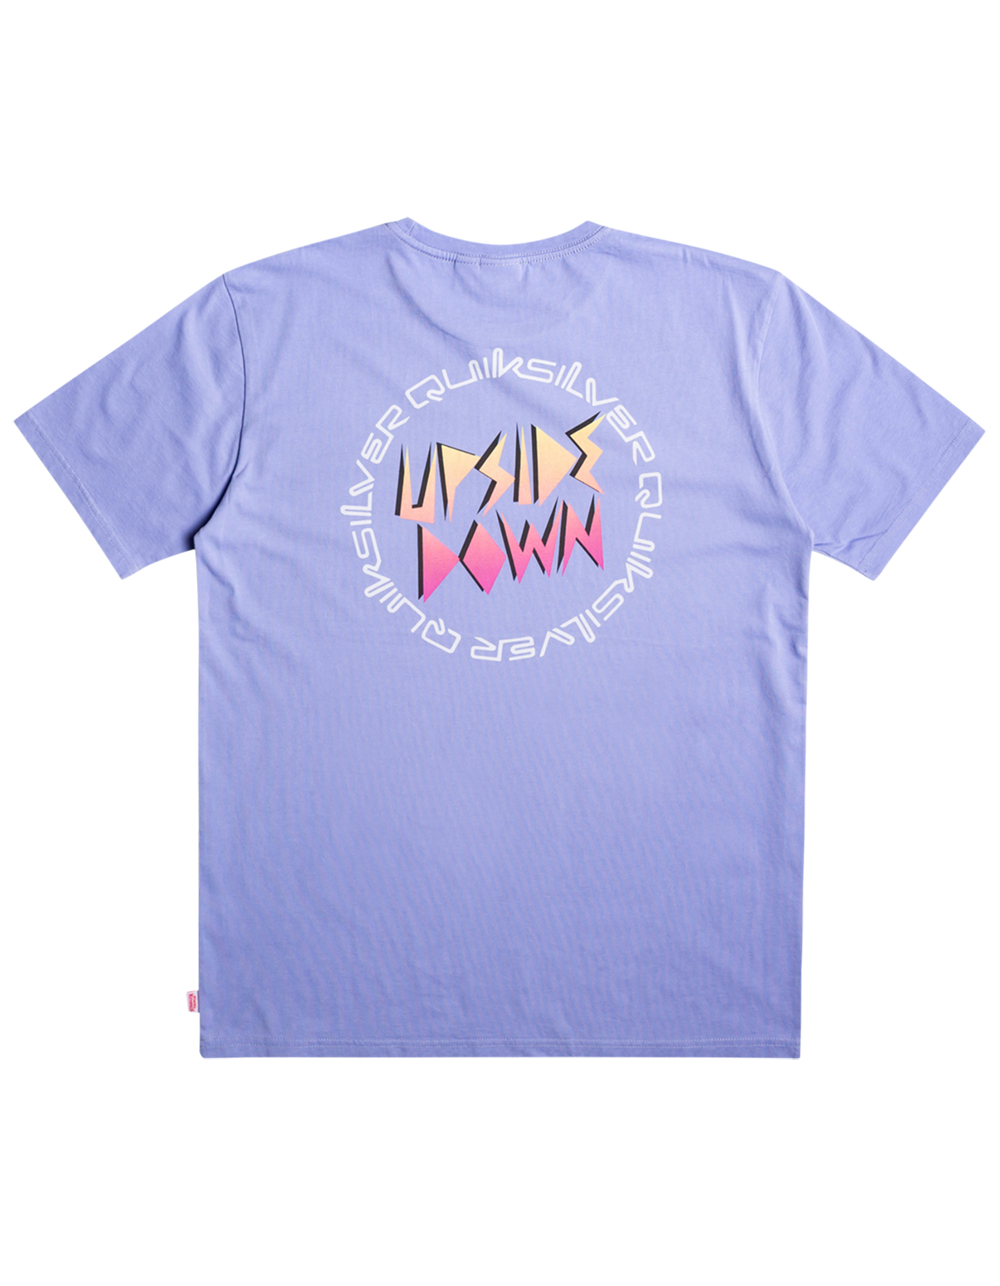 QUIKSILVER x Stranger Things New Wave Age Mens Tee - VIOLET | Tillys